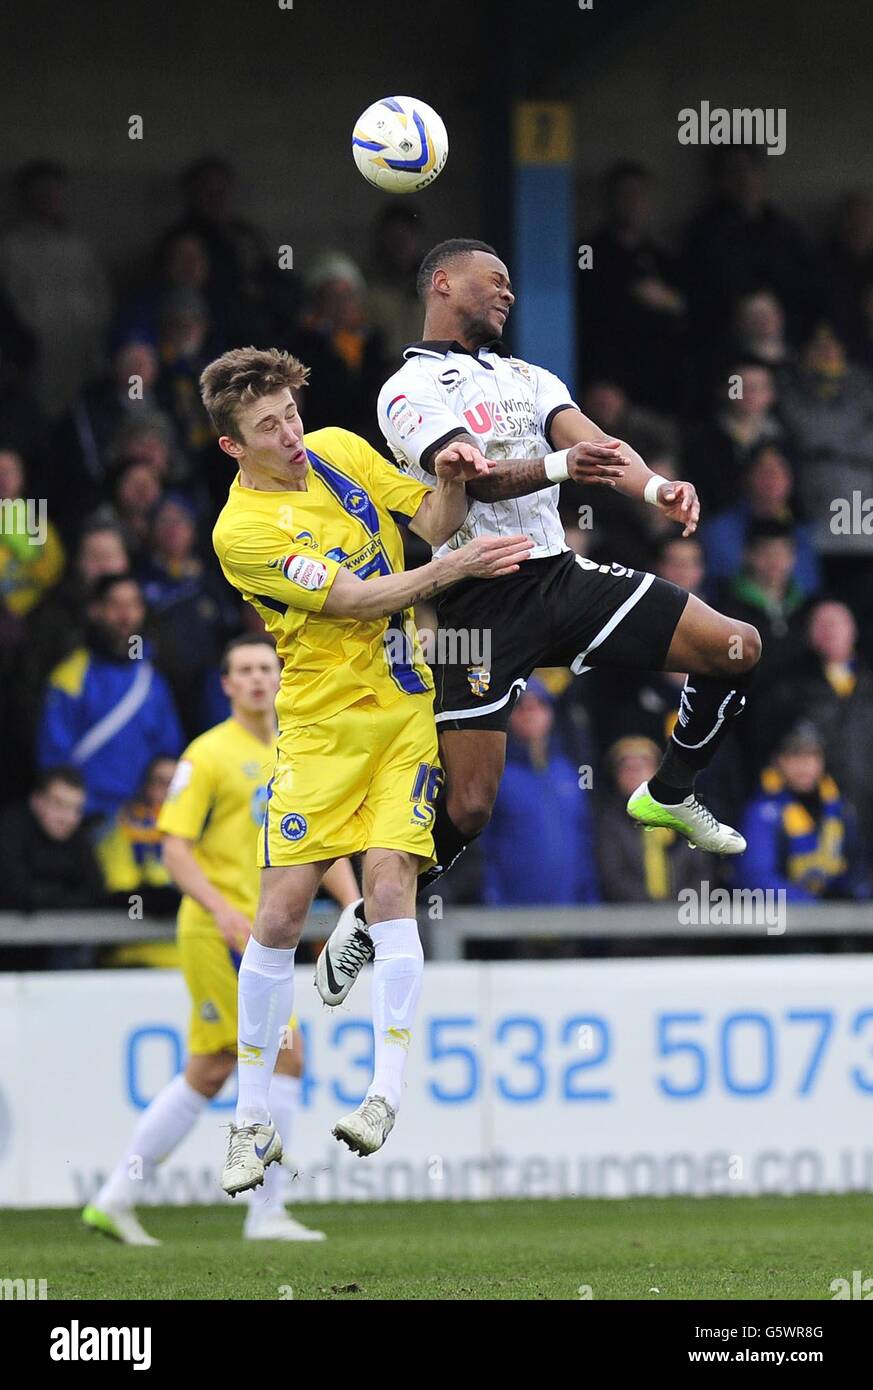 Soccer - npower Football League Two - Torquay United v Port Vale - Plainmoor. Torquay United's Angus MacDonald and Port Vale's Jennison Myrie-Williams in action during the npower League Two match at Plainmoor, Torquay. Stock Photo